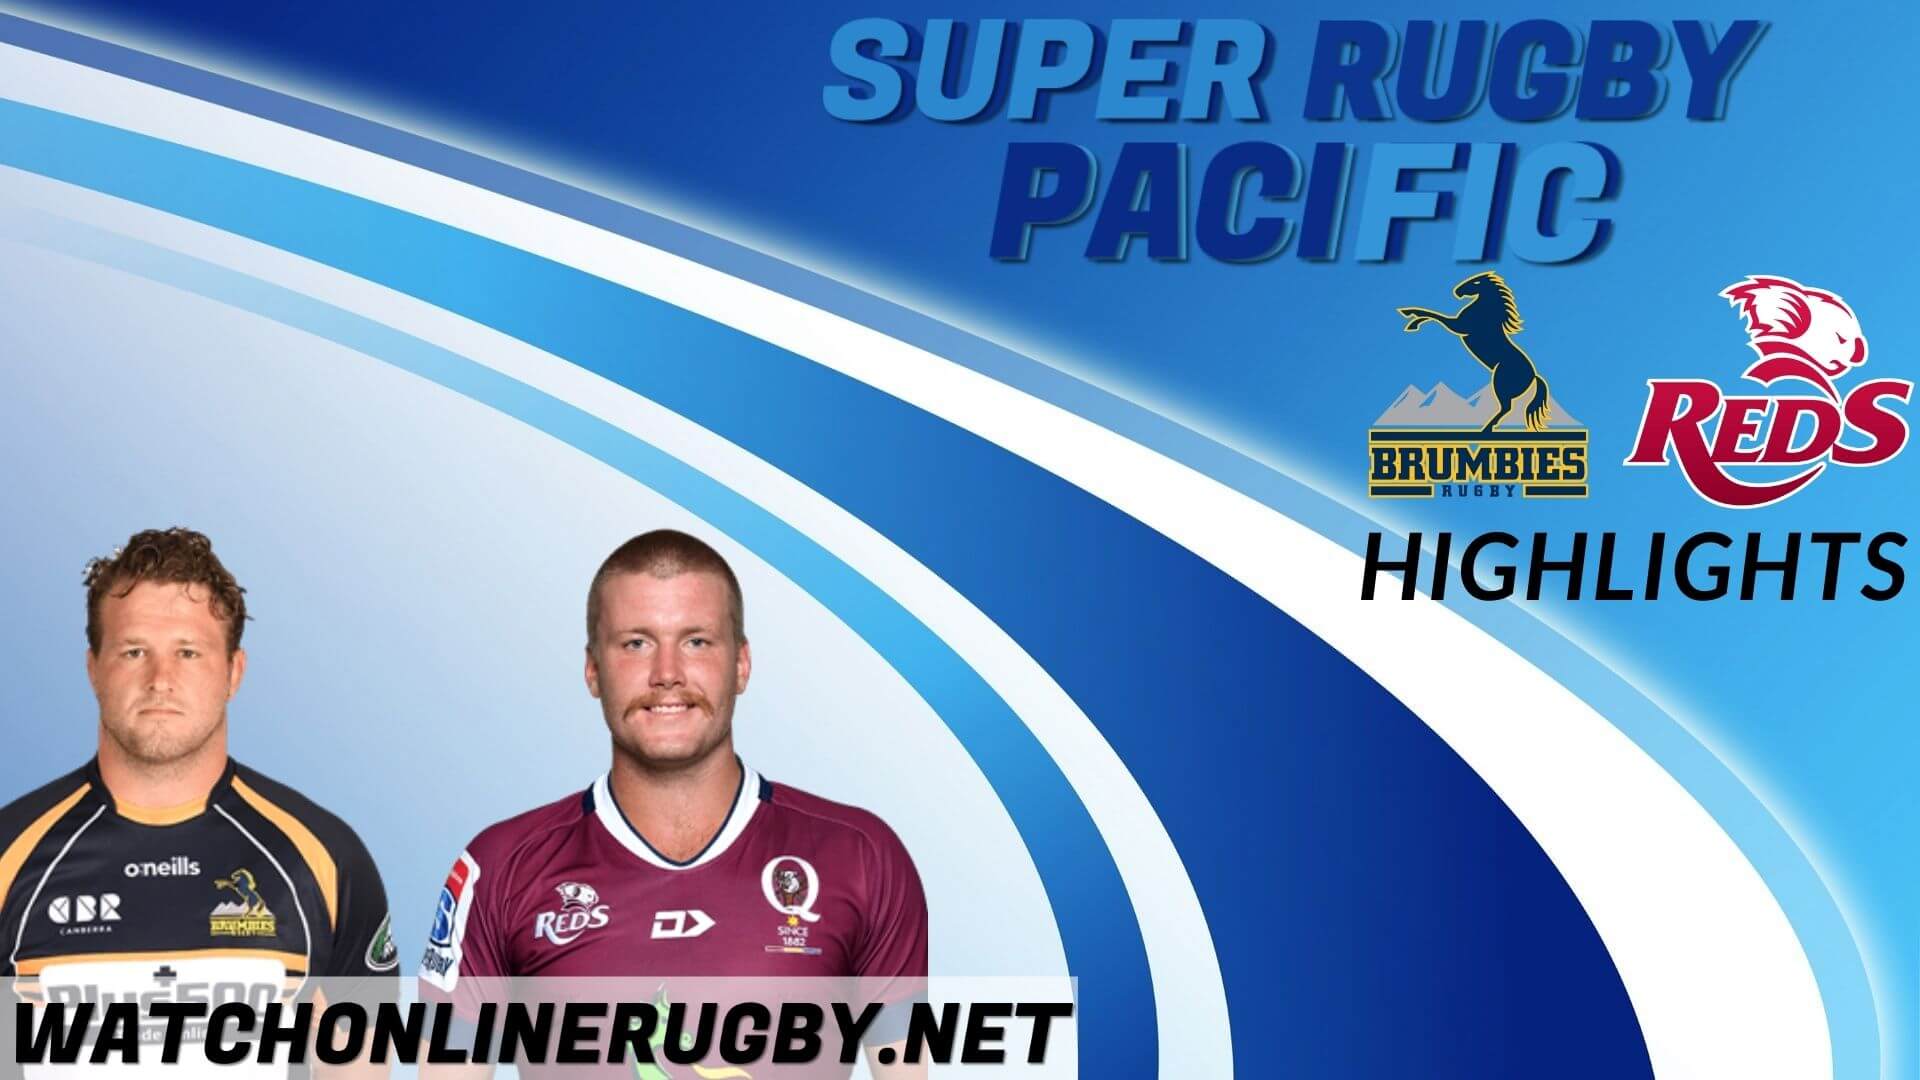 Brumbies Vs Reds Super Rugby Pacific 2022 RD 5